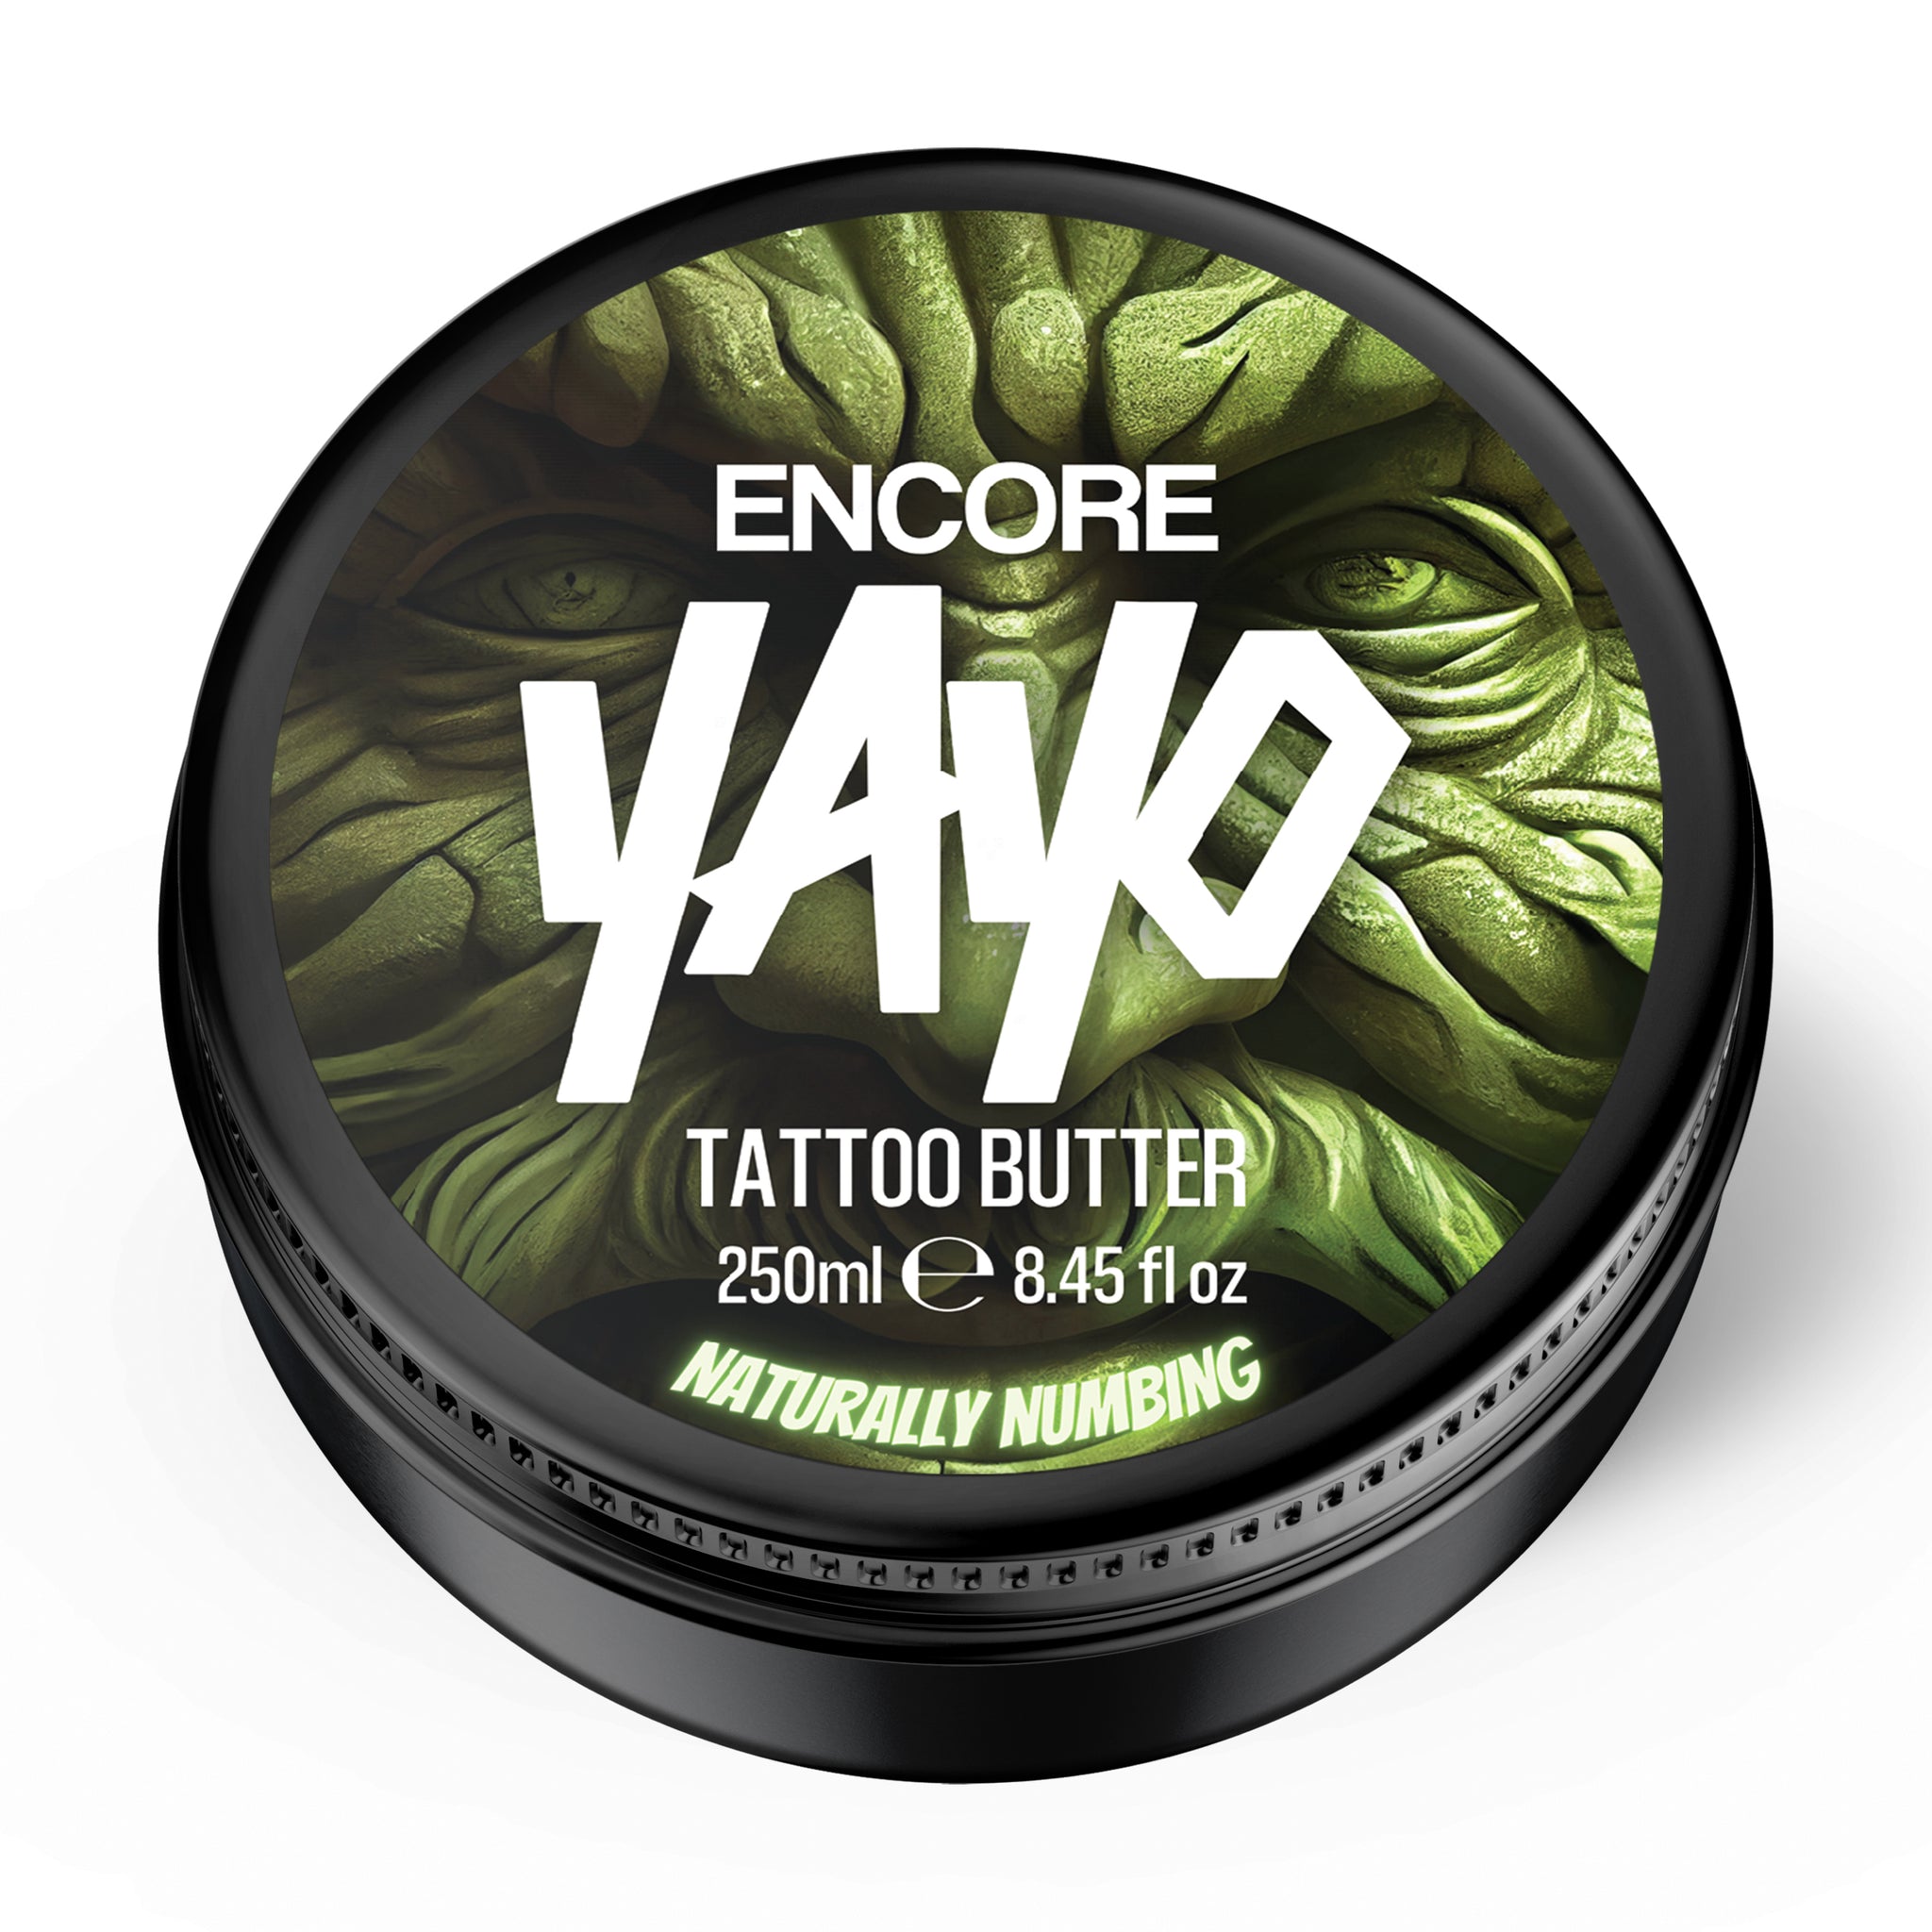 Encore Naturally Numbing Tattoo Butter